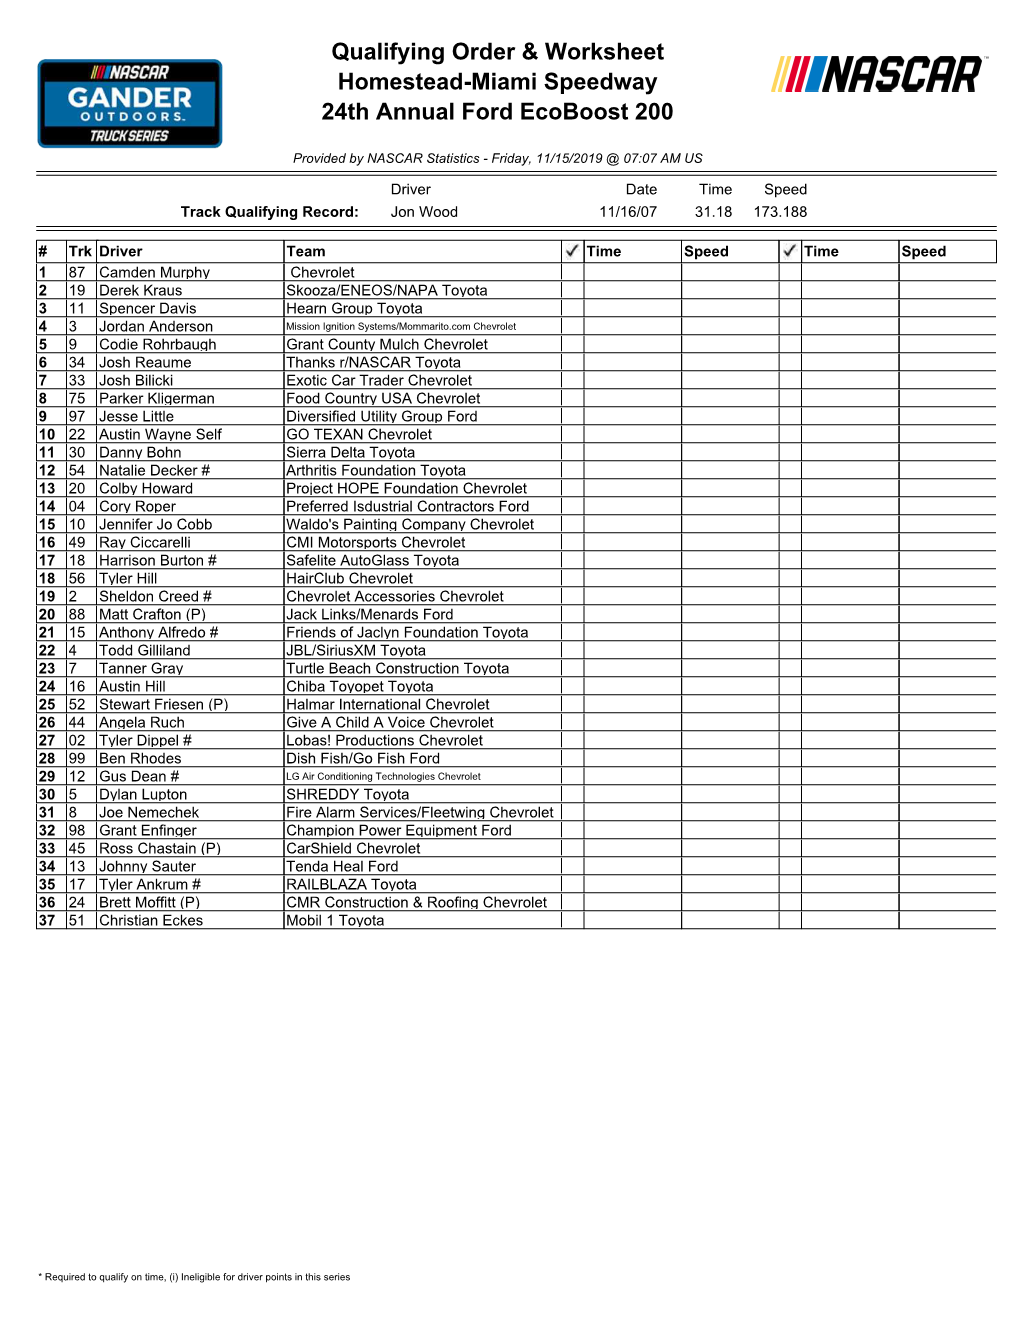 Qualifying Order & Worksheet Homestead-Miami Speedway 24Th Annual Ford Ecoboost 200